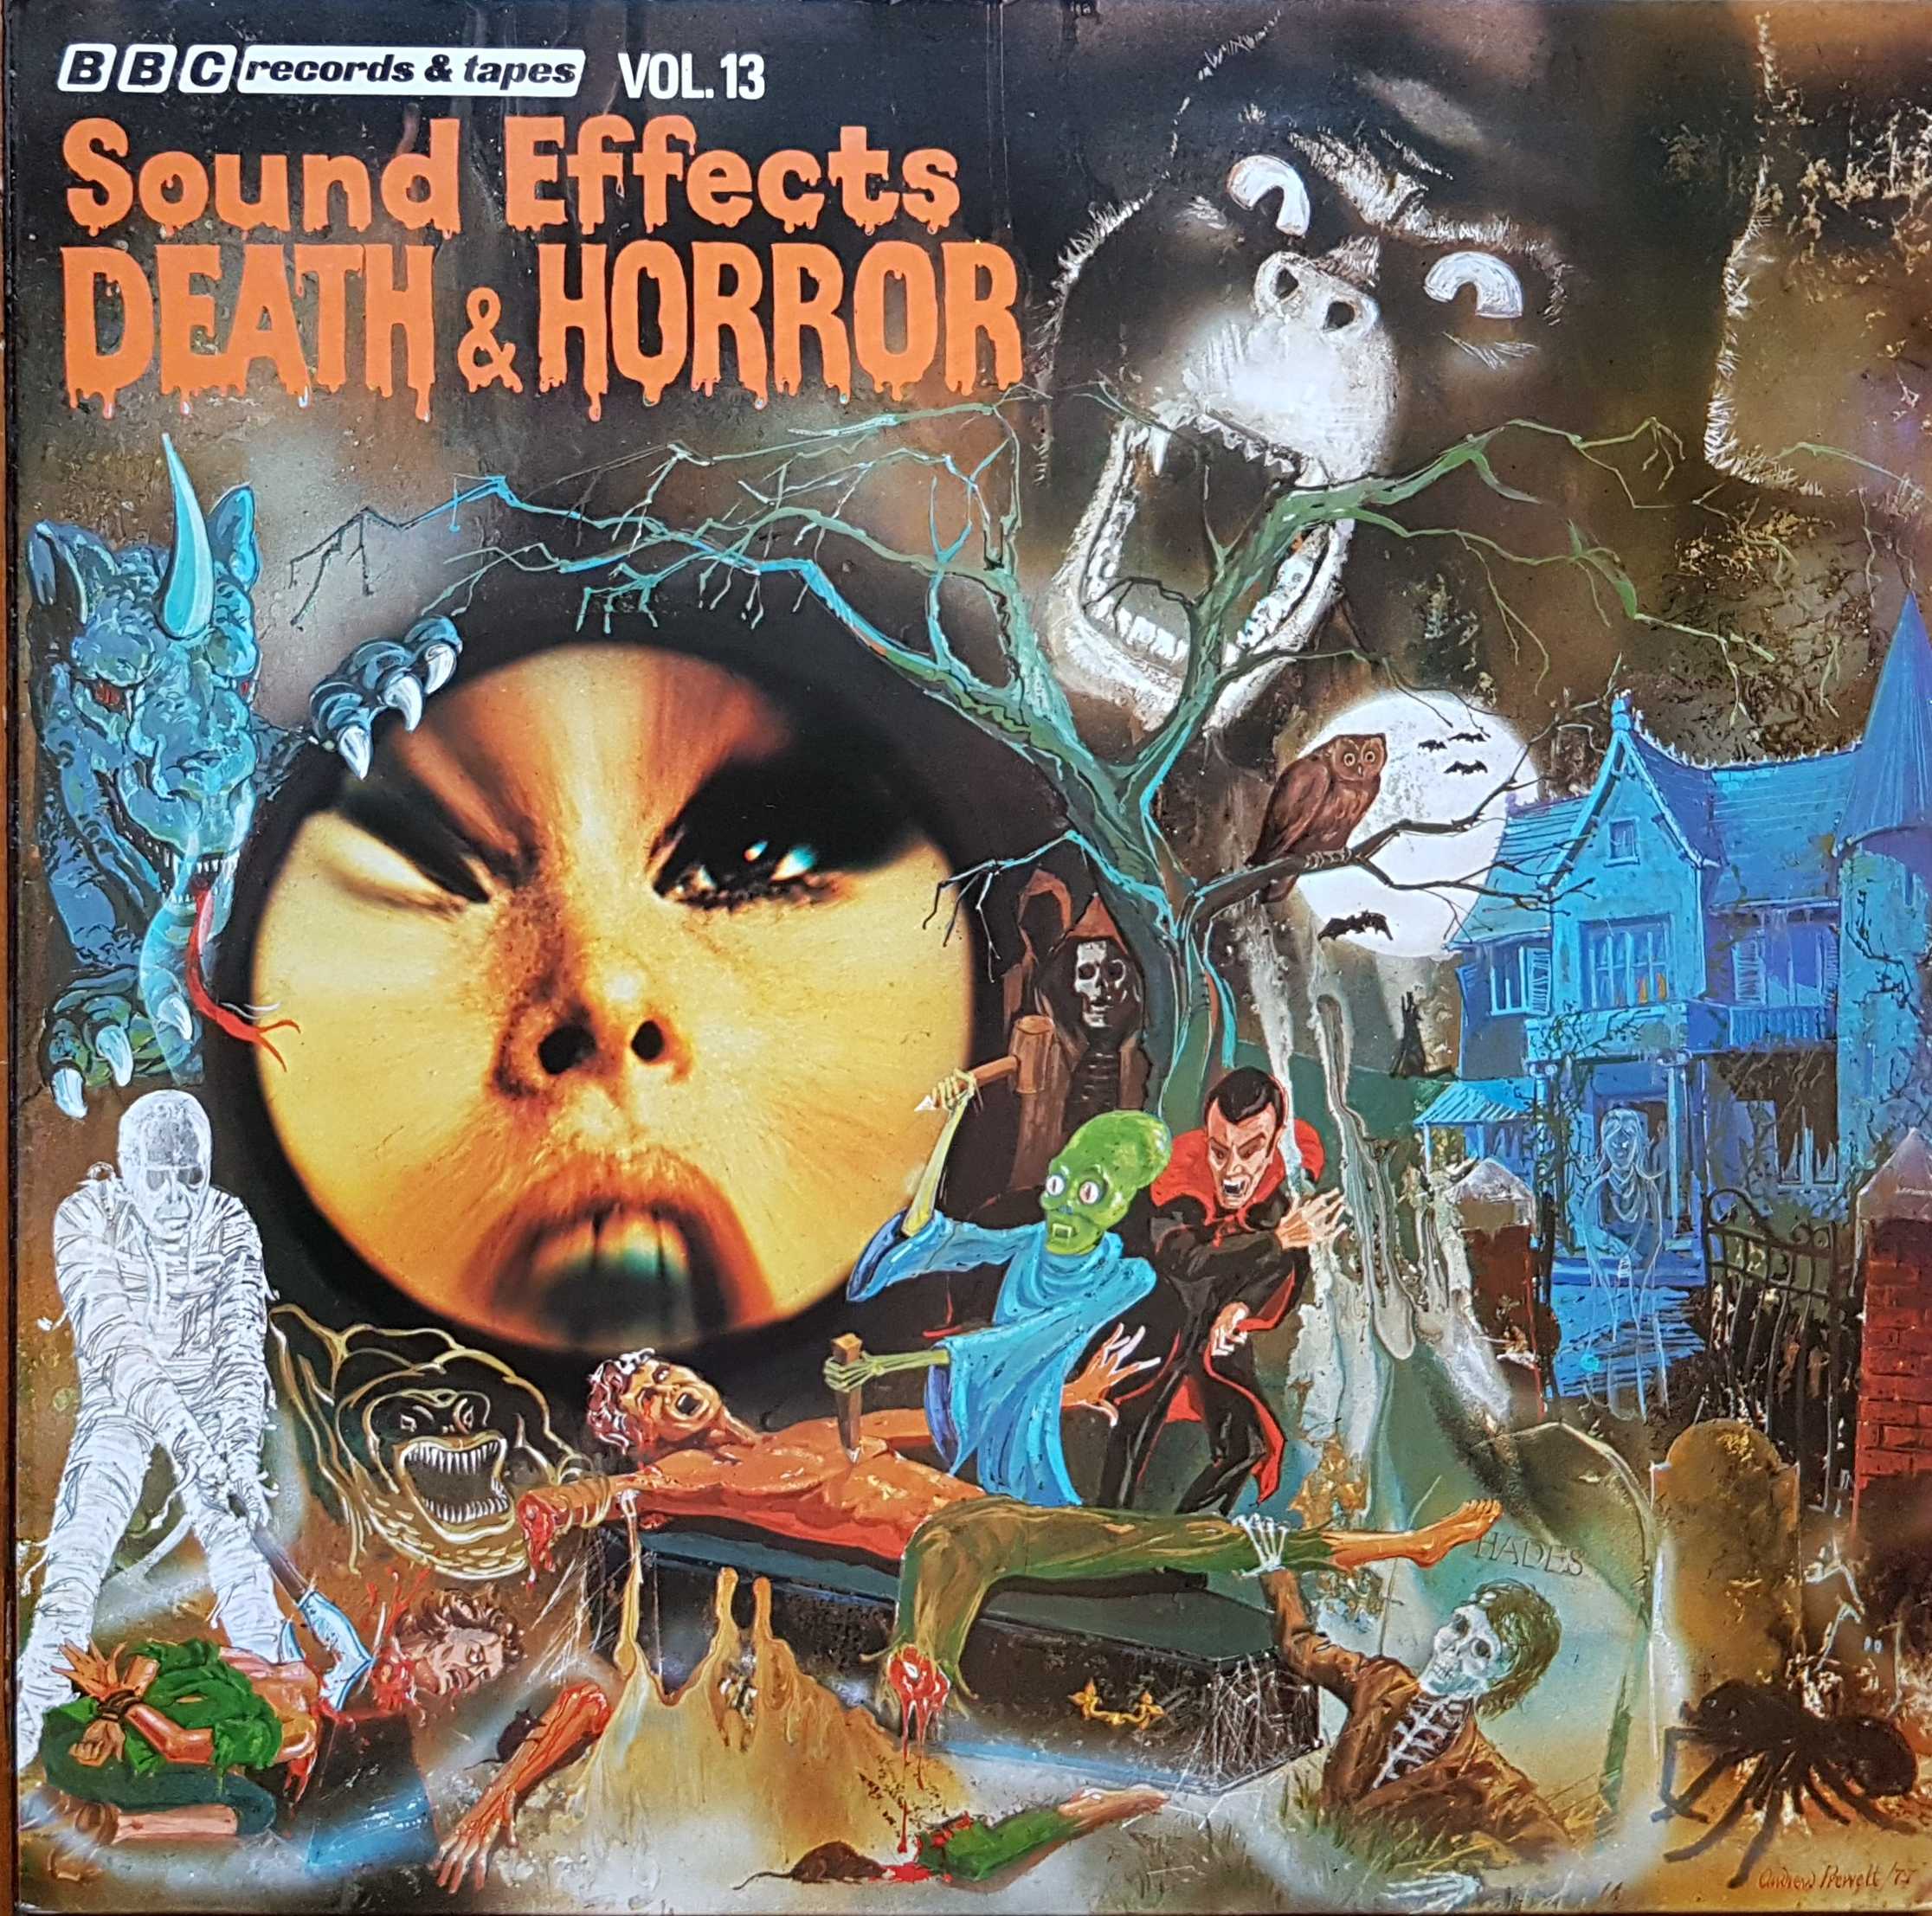 Picture of REC 269 Death and horror by artist Mike Harding from the BBC records and Tapes library